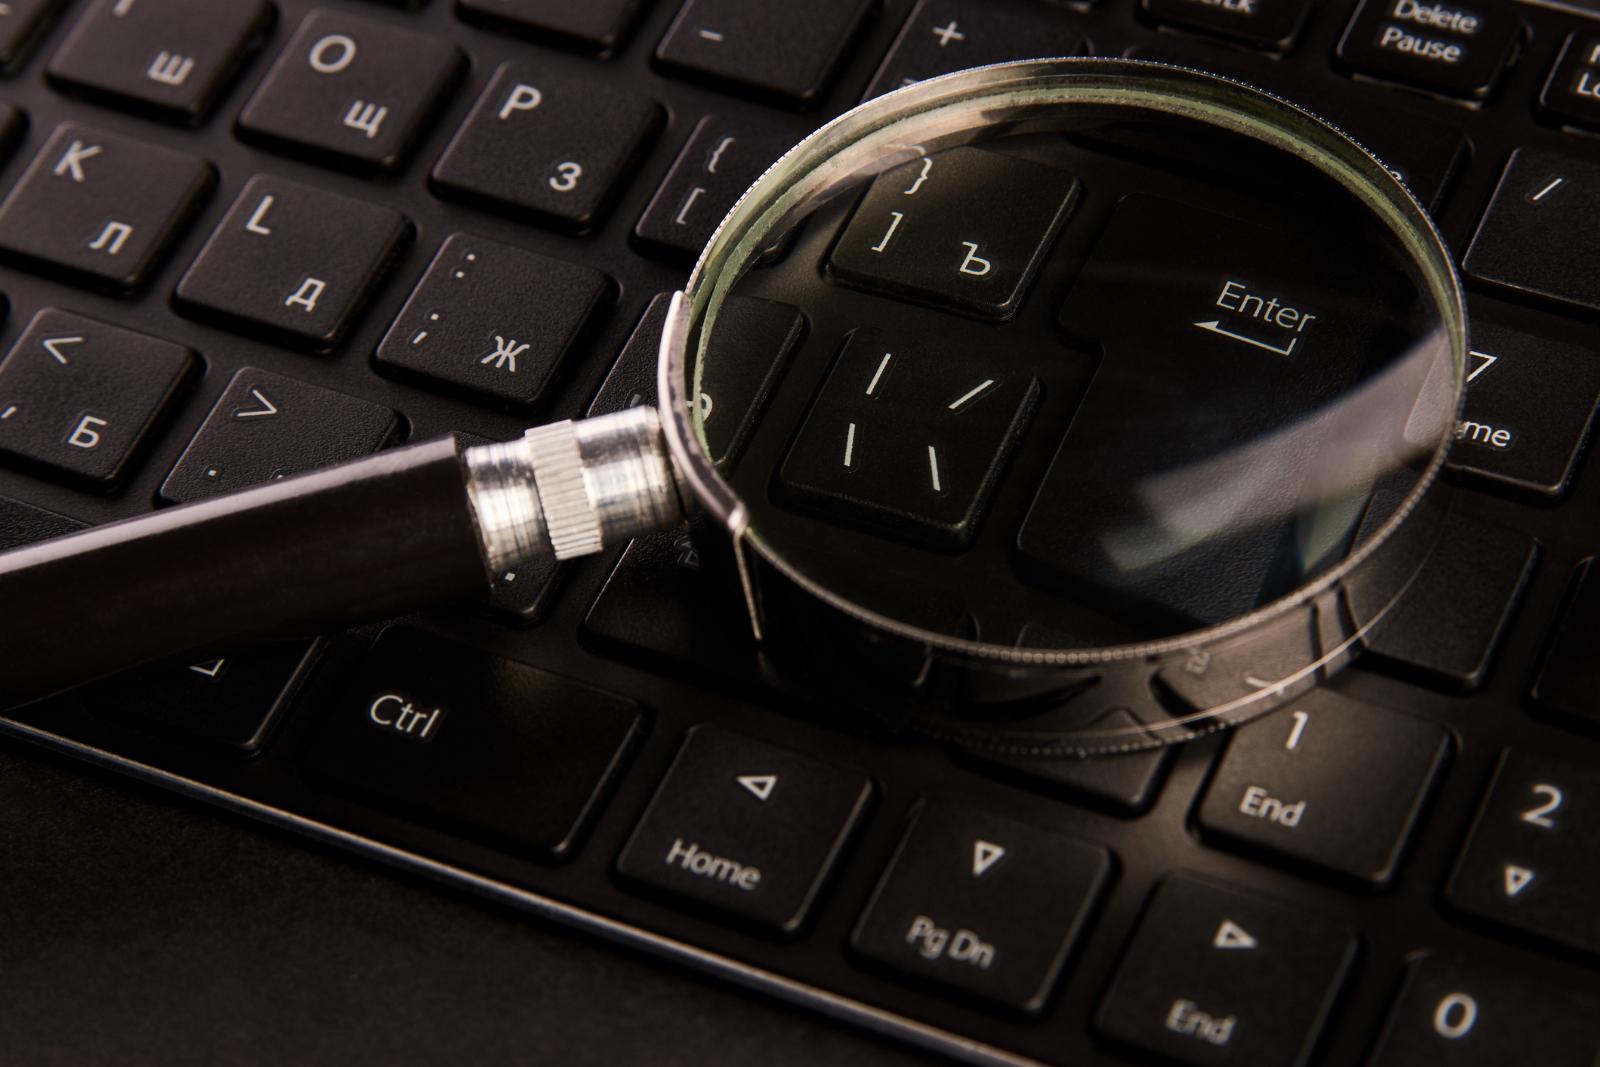 Cypago, which aims to automate compliance and governance for companies, raises $13M